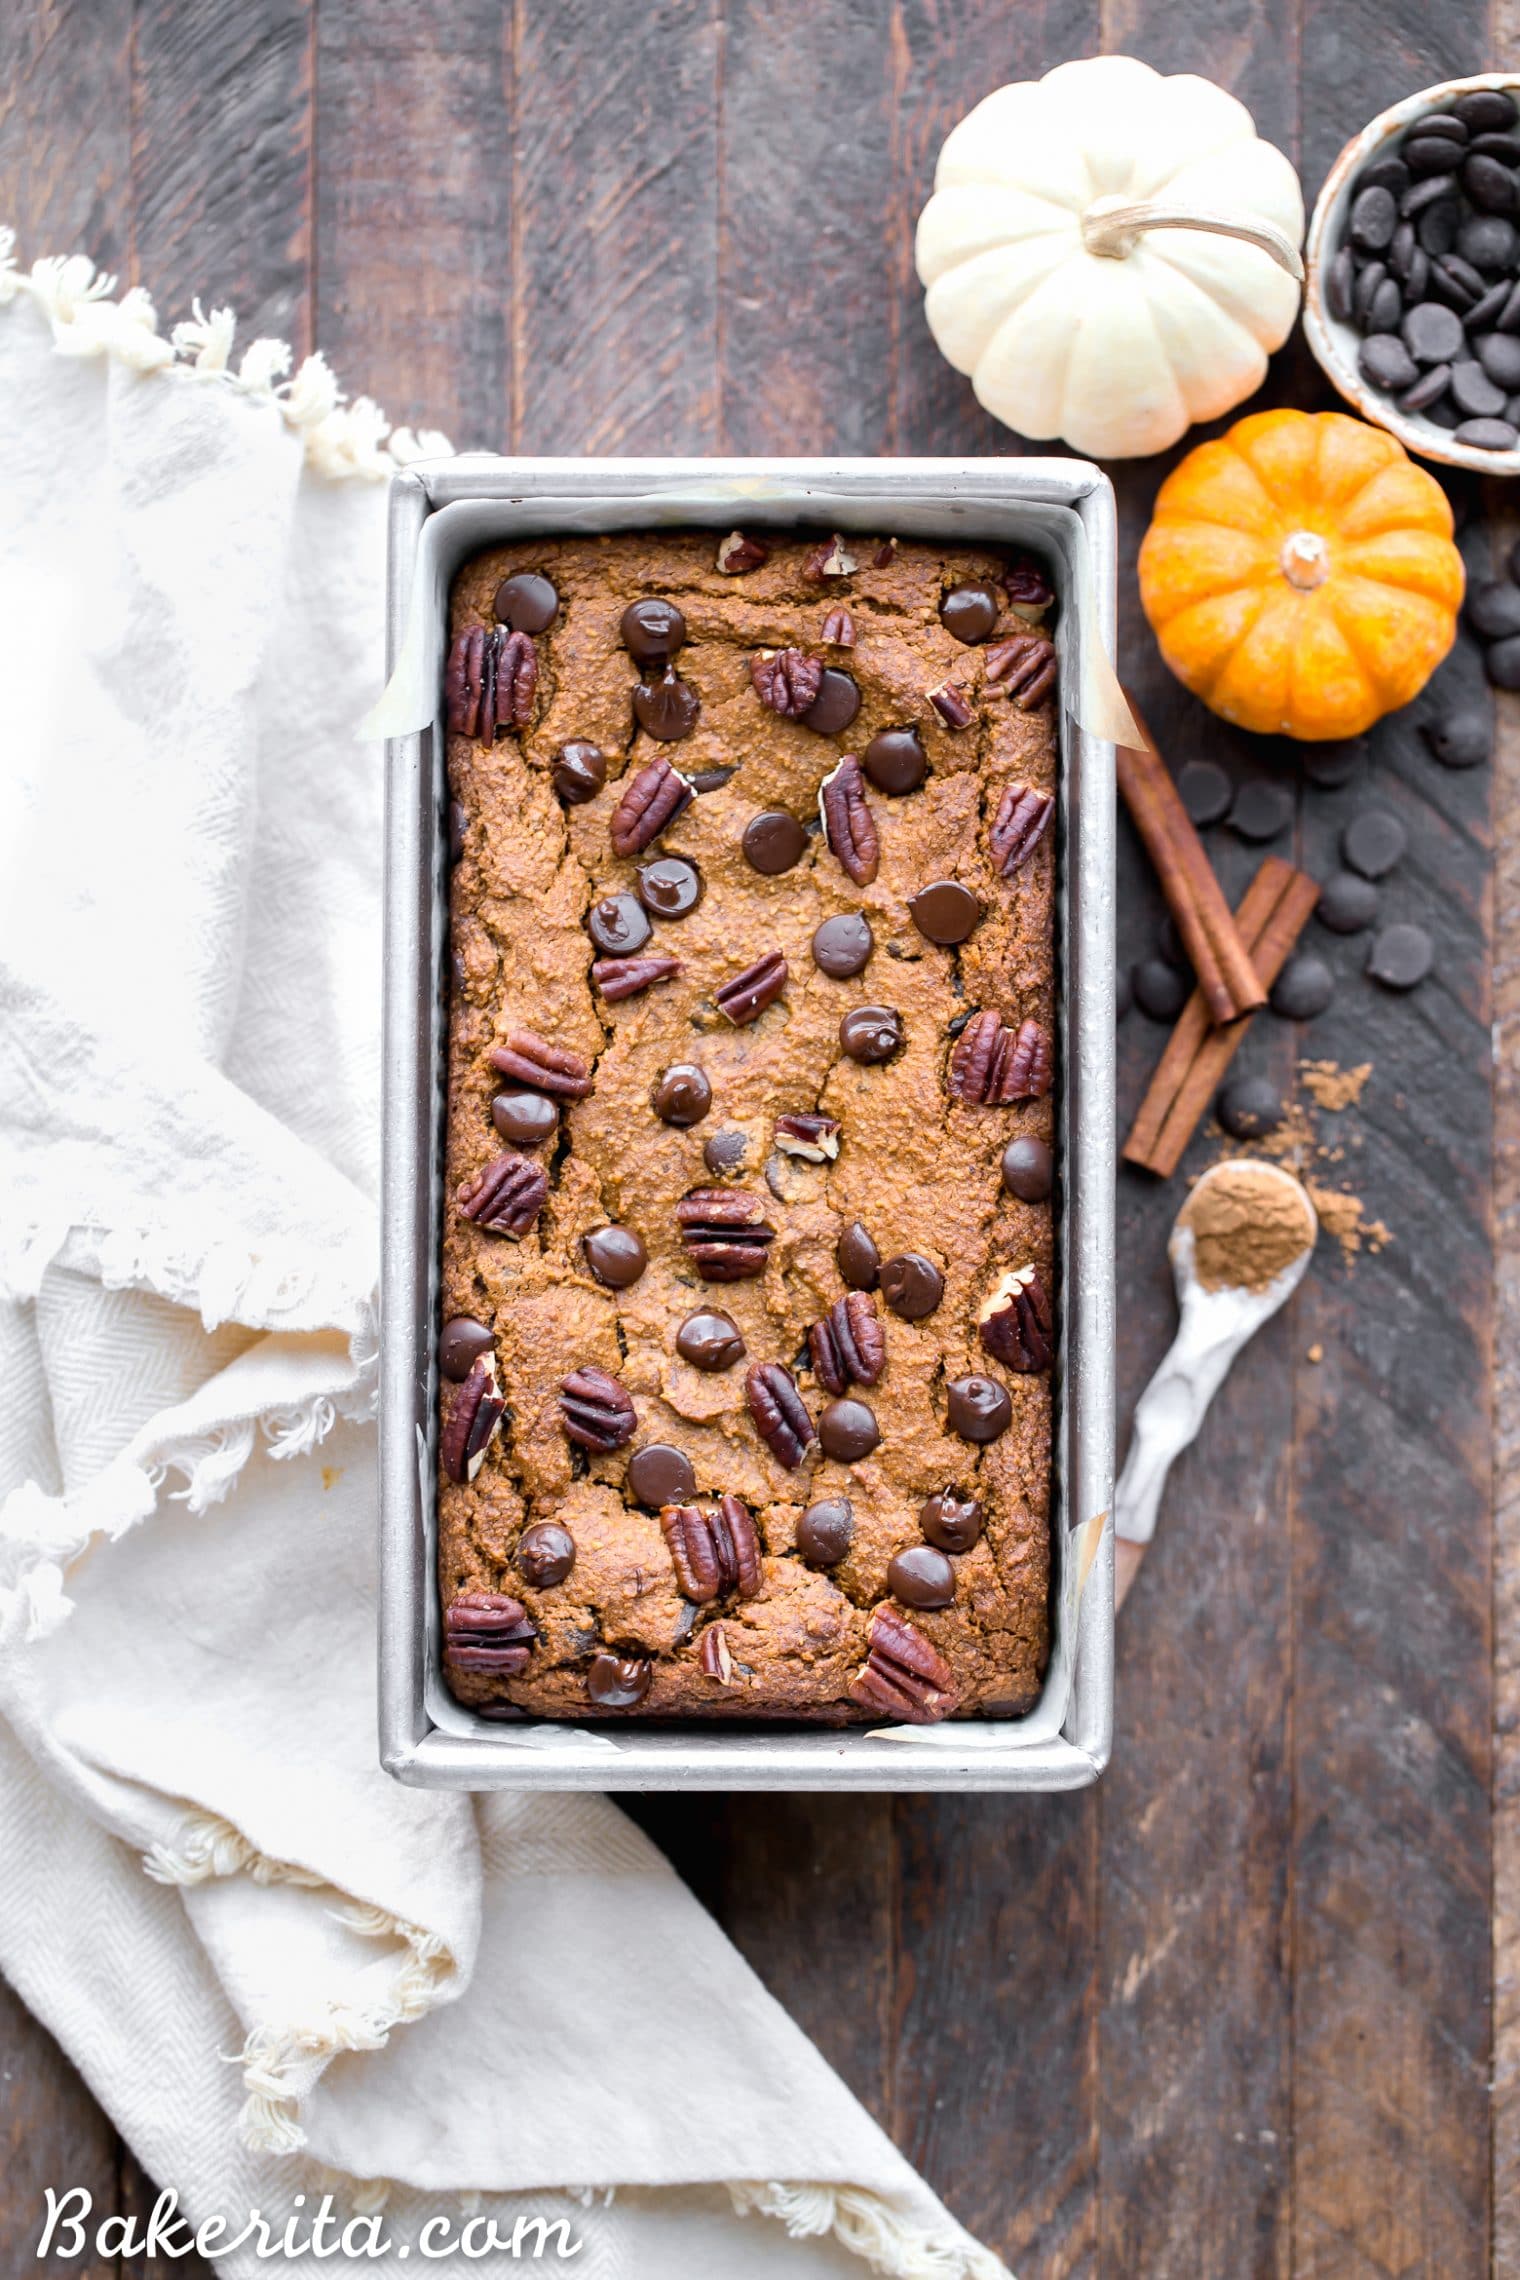 This Chocolate Chip Vegan Pumpkin Bread is quick and easy to make in one bowl! It's warm and flavorful with lots of pumpkin pie spice and full of gooey chocolate chips. This gluten-free, refined sugar-free, and vegan pumpkin bread makes a perfect breakfast or snack!